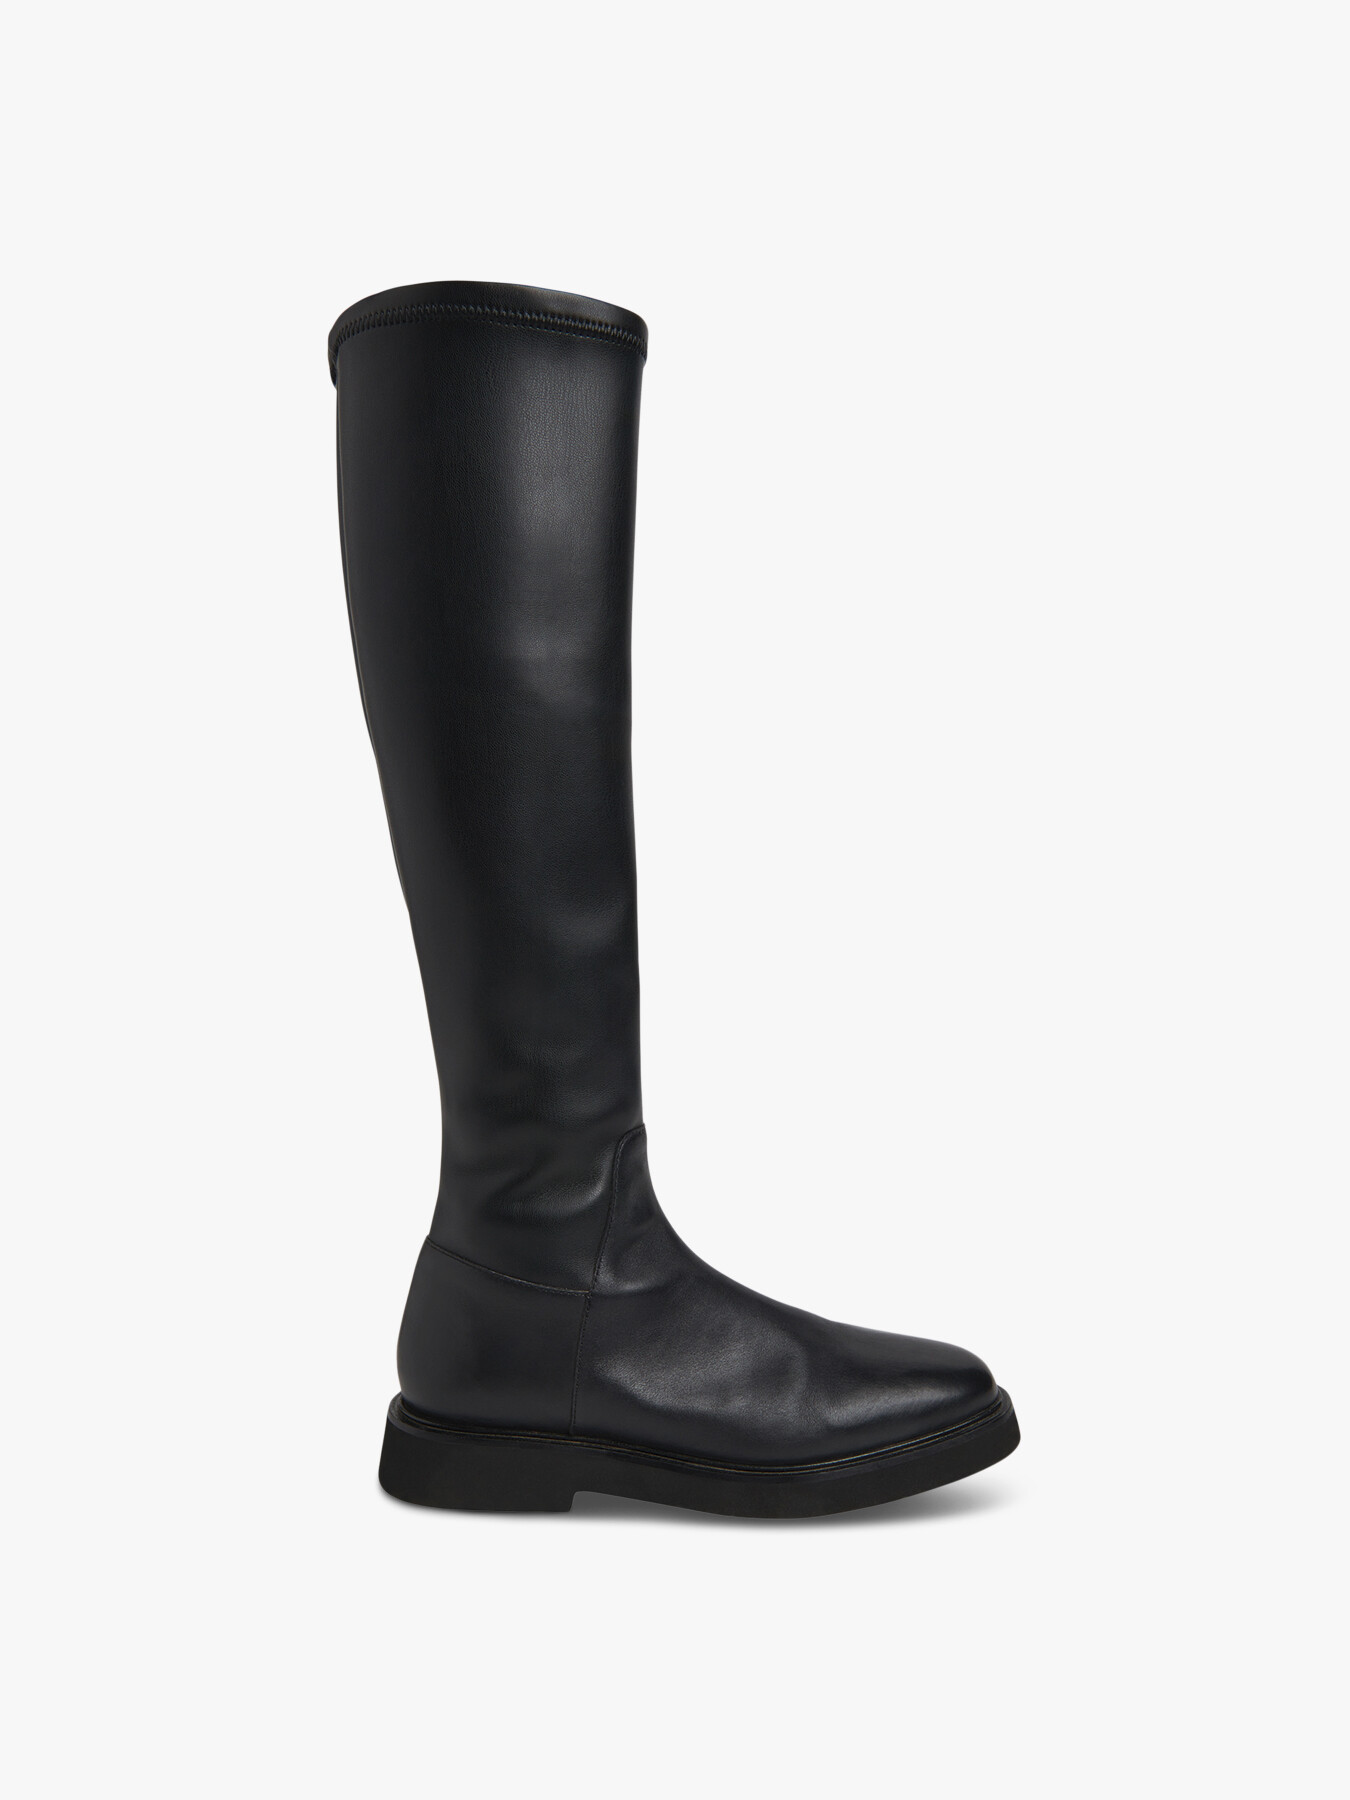 Whistles Quin Stretch Knee High Boot Black